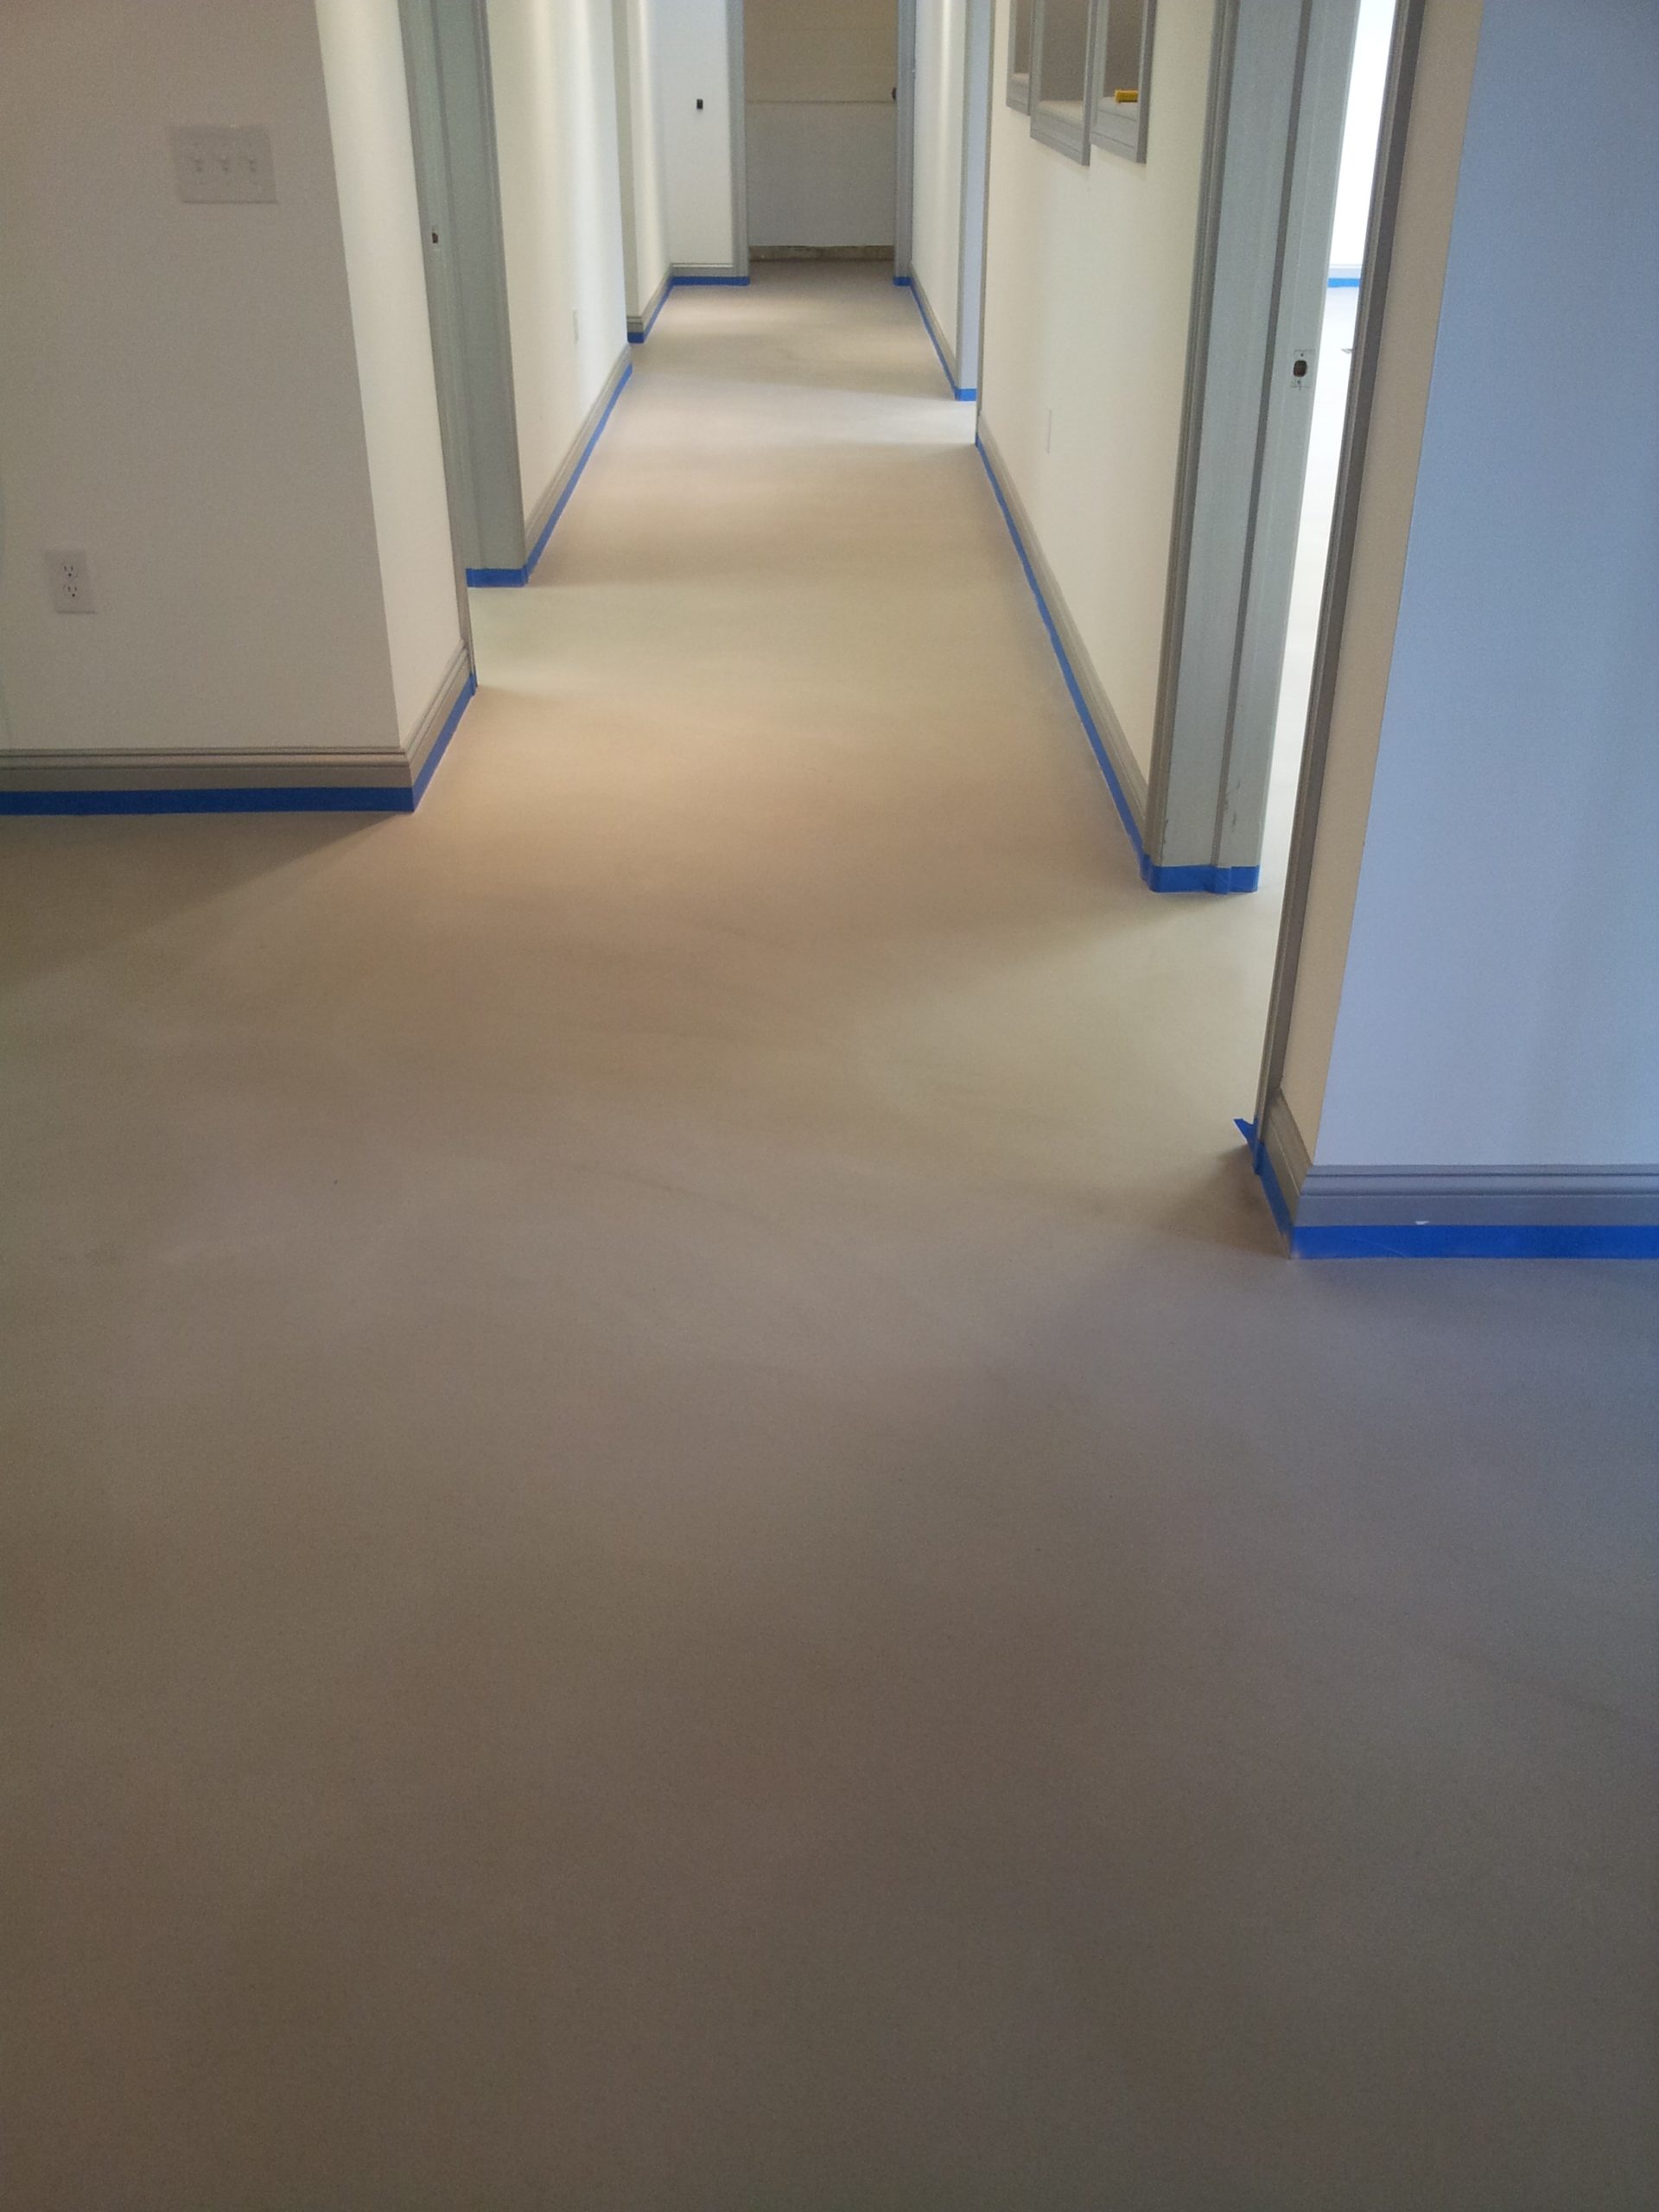 Poured Cement Floor Param 500 Poured cement flooring at Cressi showroom in Saddle Brook NJ | Duraamen Engineered Products Inc